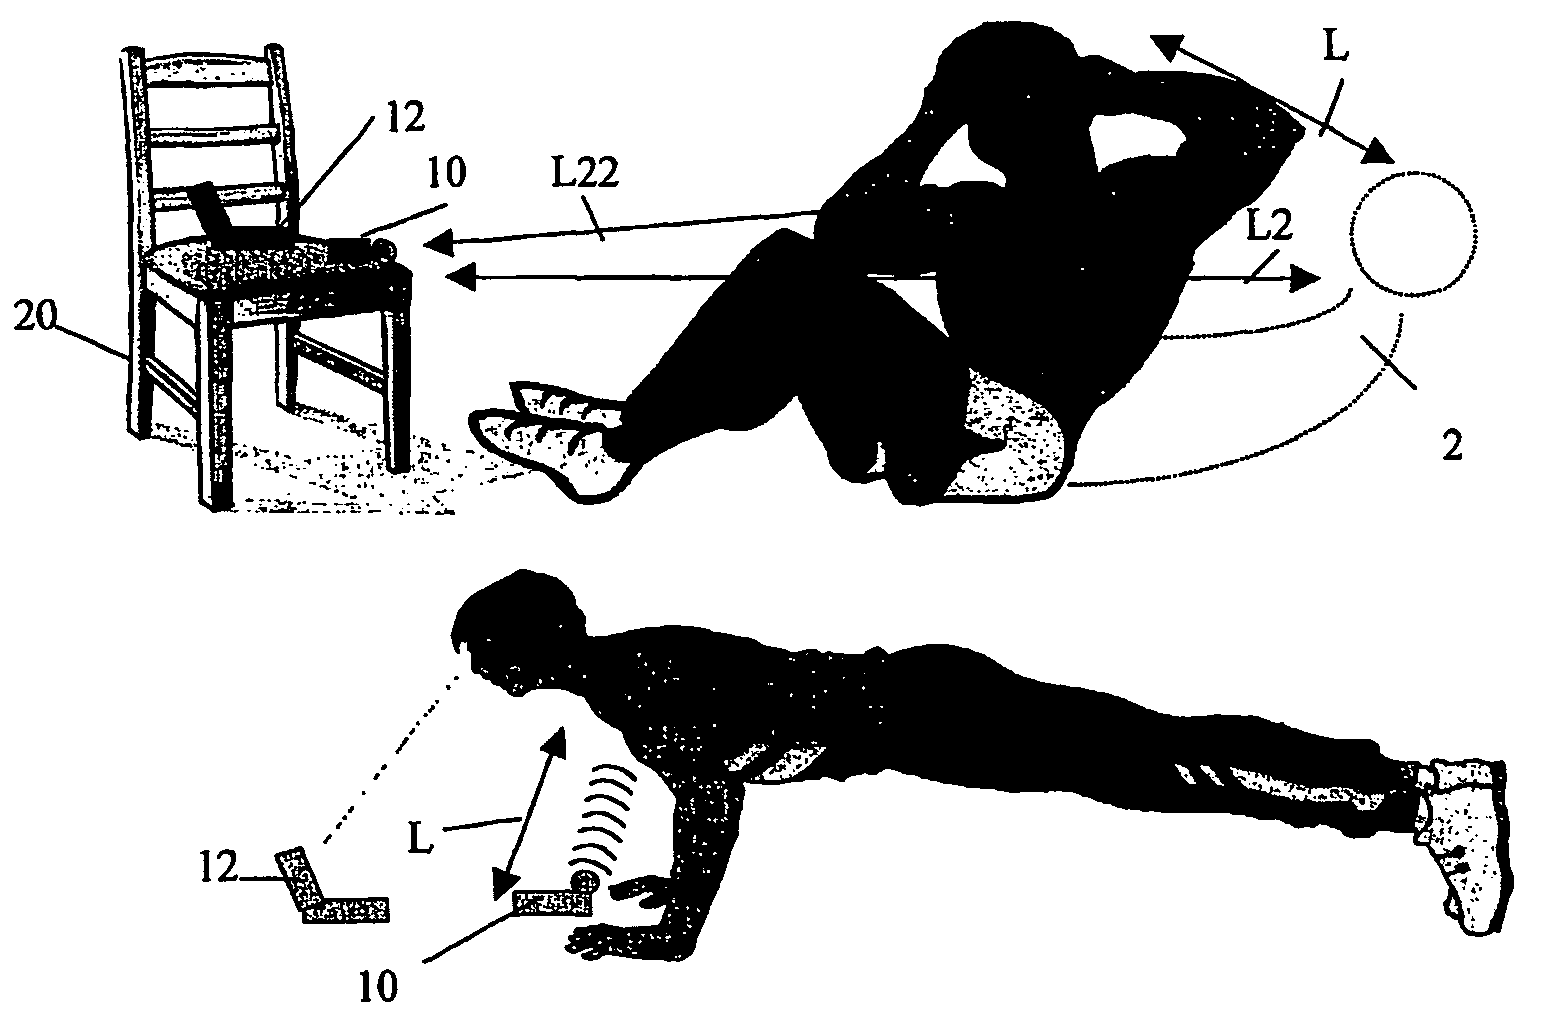 Feedback system for monitoring and measuring physical exercise related information